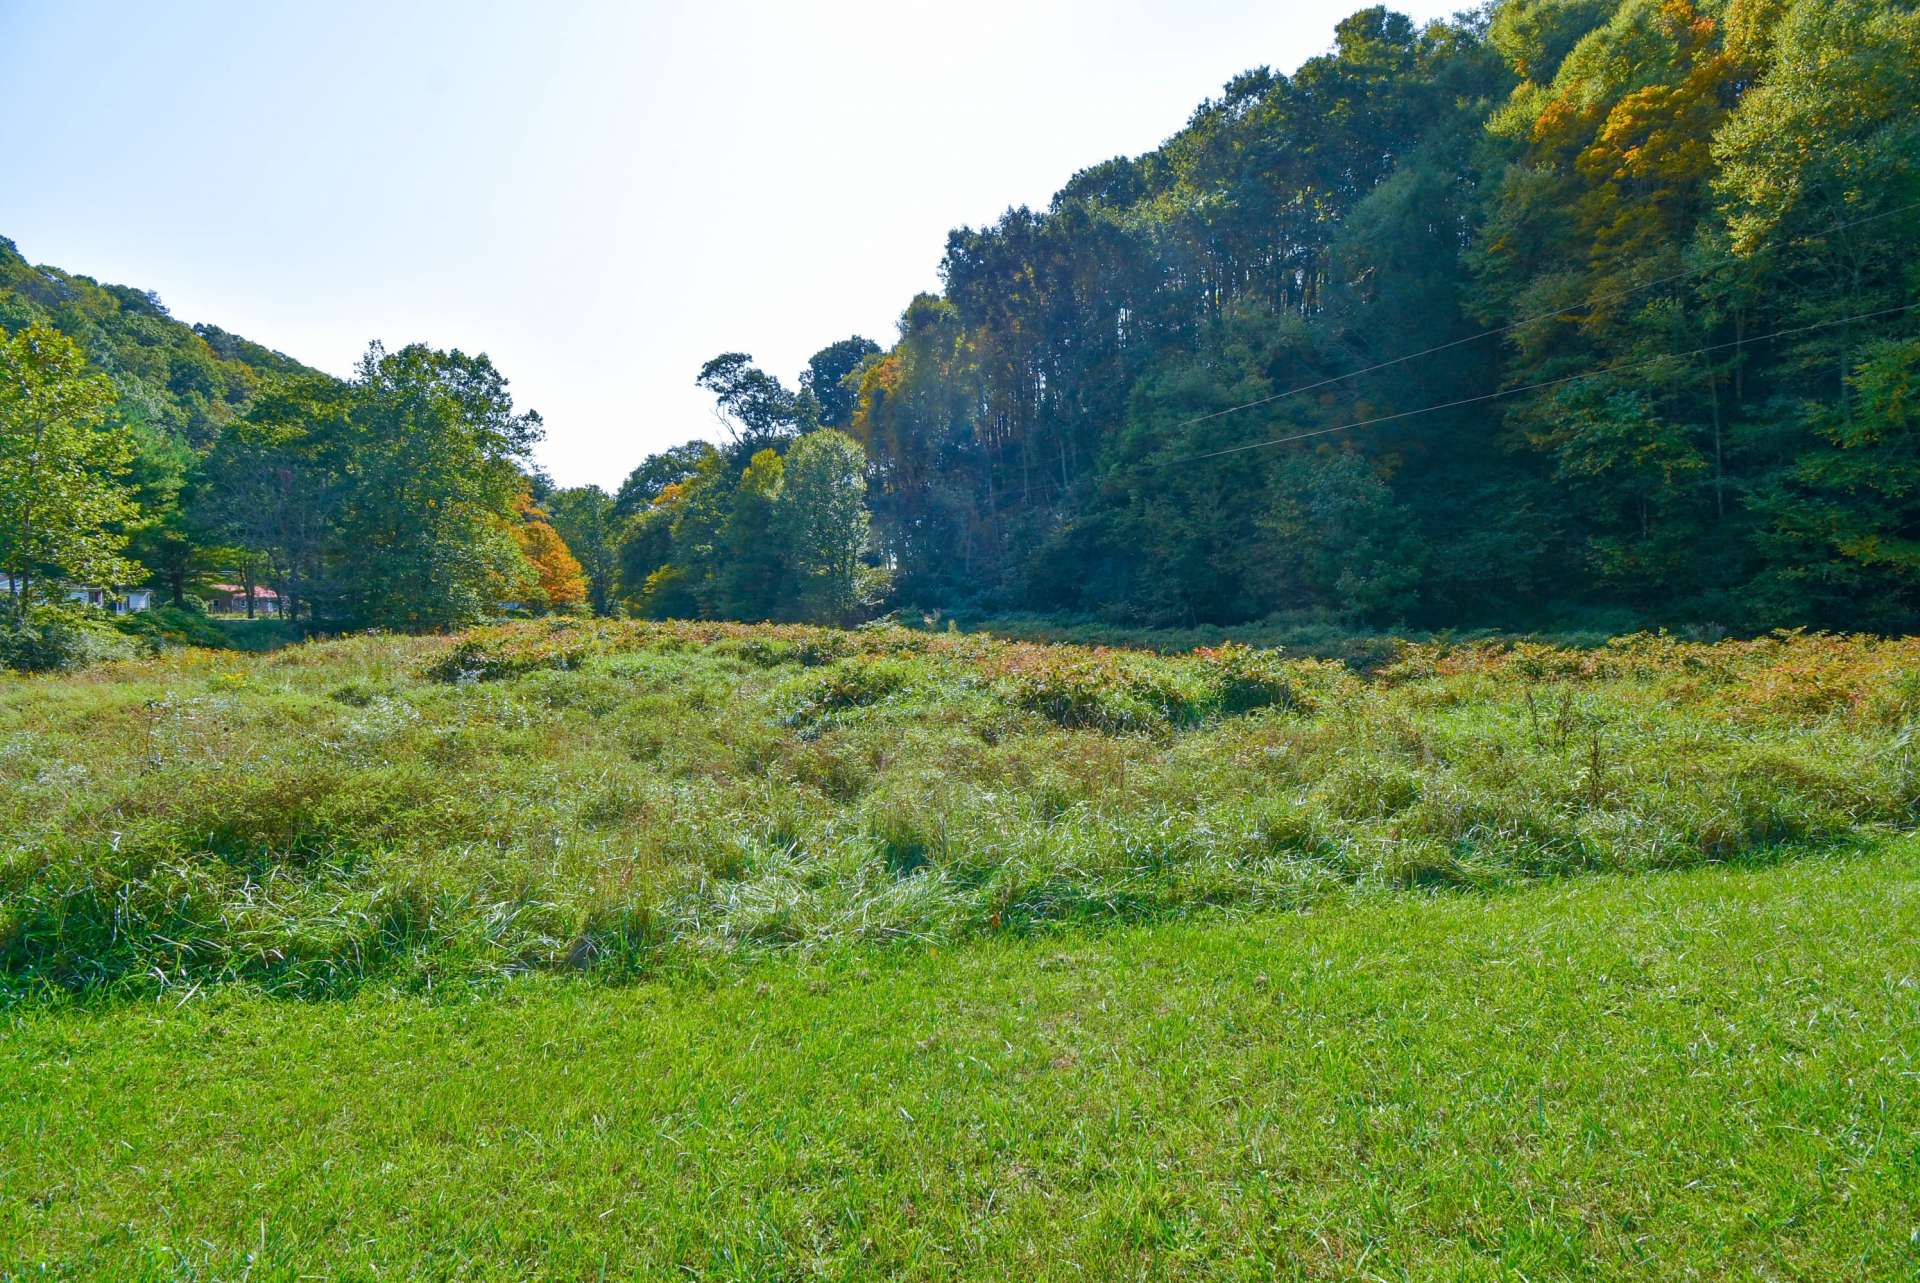 There is pasture for a horse and the location is close to the horse trails of Grayson Highlands.